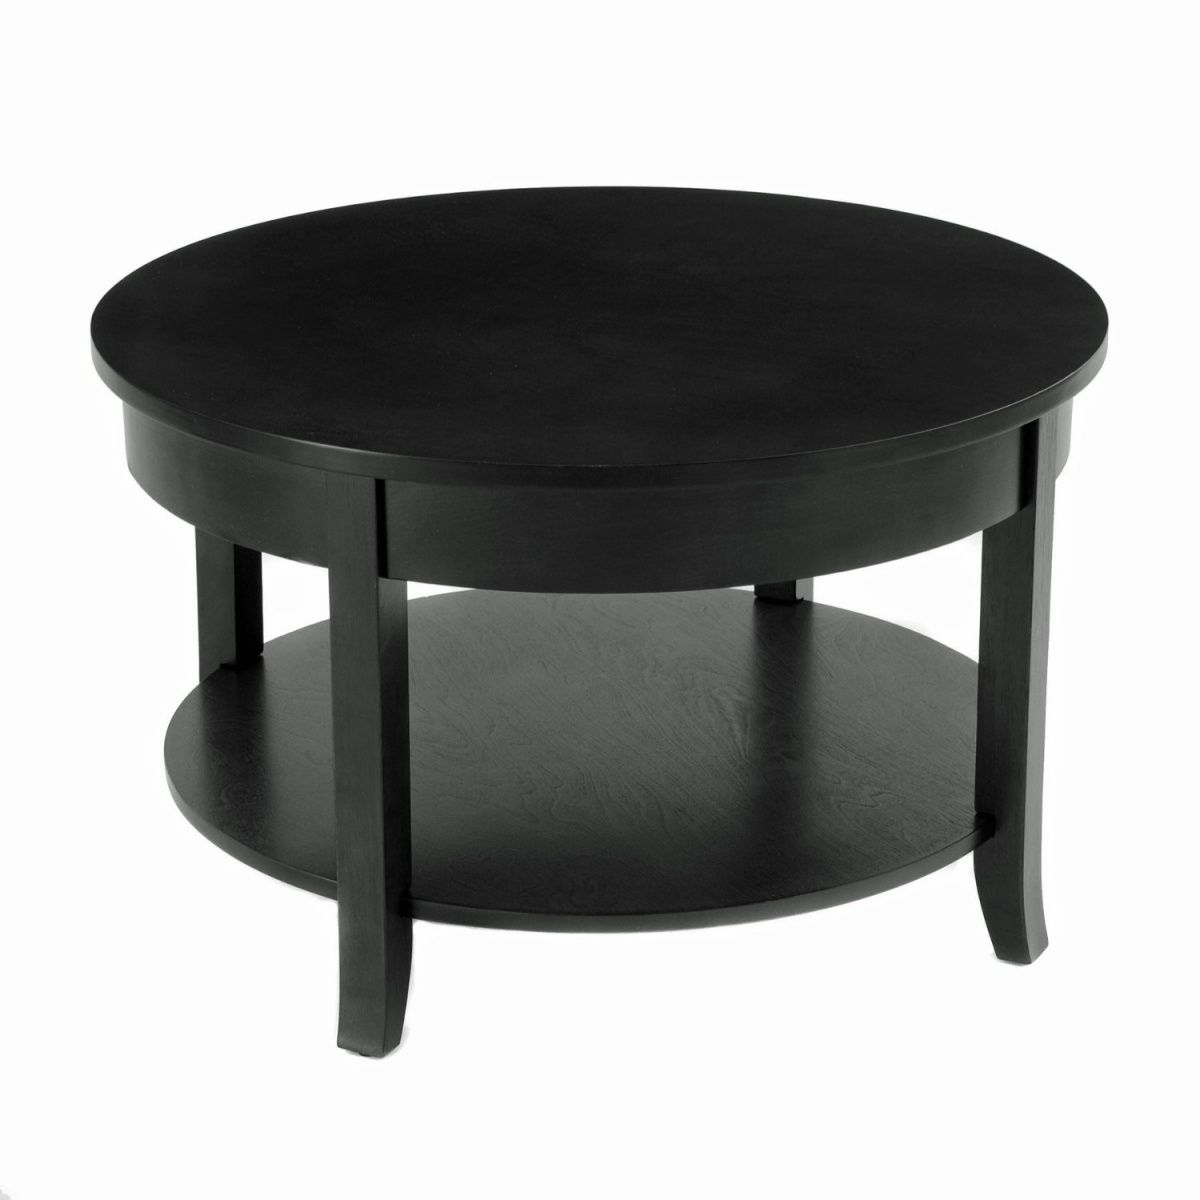 Sophisticated Black Coffee Tables Round Black Coffee Table Ideas With Storage Furniture 2016 Free (View 9 of 10)